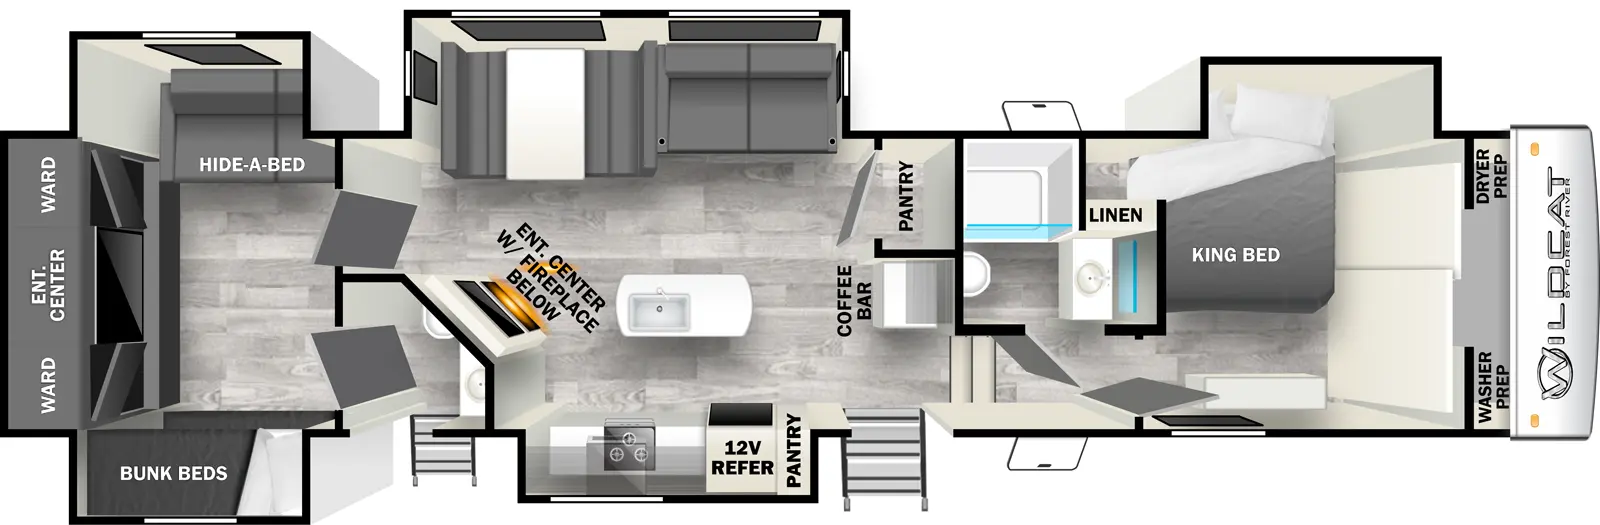 The 37BEST has four slideouts and two entries. Interior layout front to back: front wardrobe with washer/dryer prep, off-door side king bed slideout and linen closet; off-door side full bathroom; steps down to entry and main living area; coffee bar and pantry along inner wall; off-door side slideout with sofa and dinette; kitchen island with sink; door side slideout with pantry, 12V refrigerator, and kitchen counter with cooktop; angled entertainment center with fireplace below along inner wall; rear bunk room with off-door side hide-a-bed slideout, rear entertainment center with wardrobes on each side, and door side slideout with bunk beds, and half bathroom with second entry.